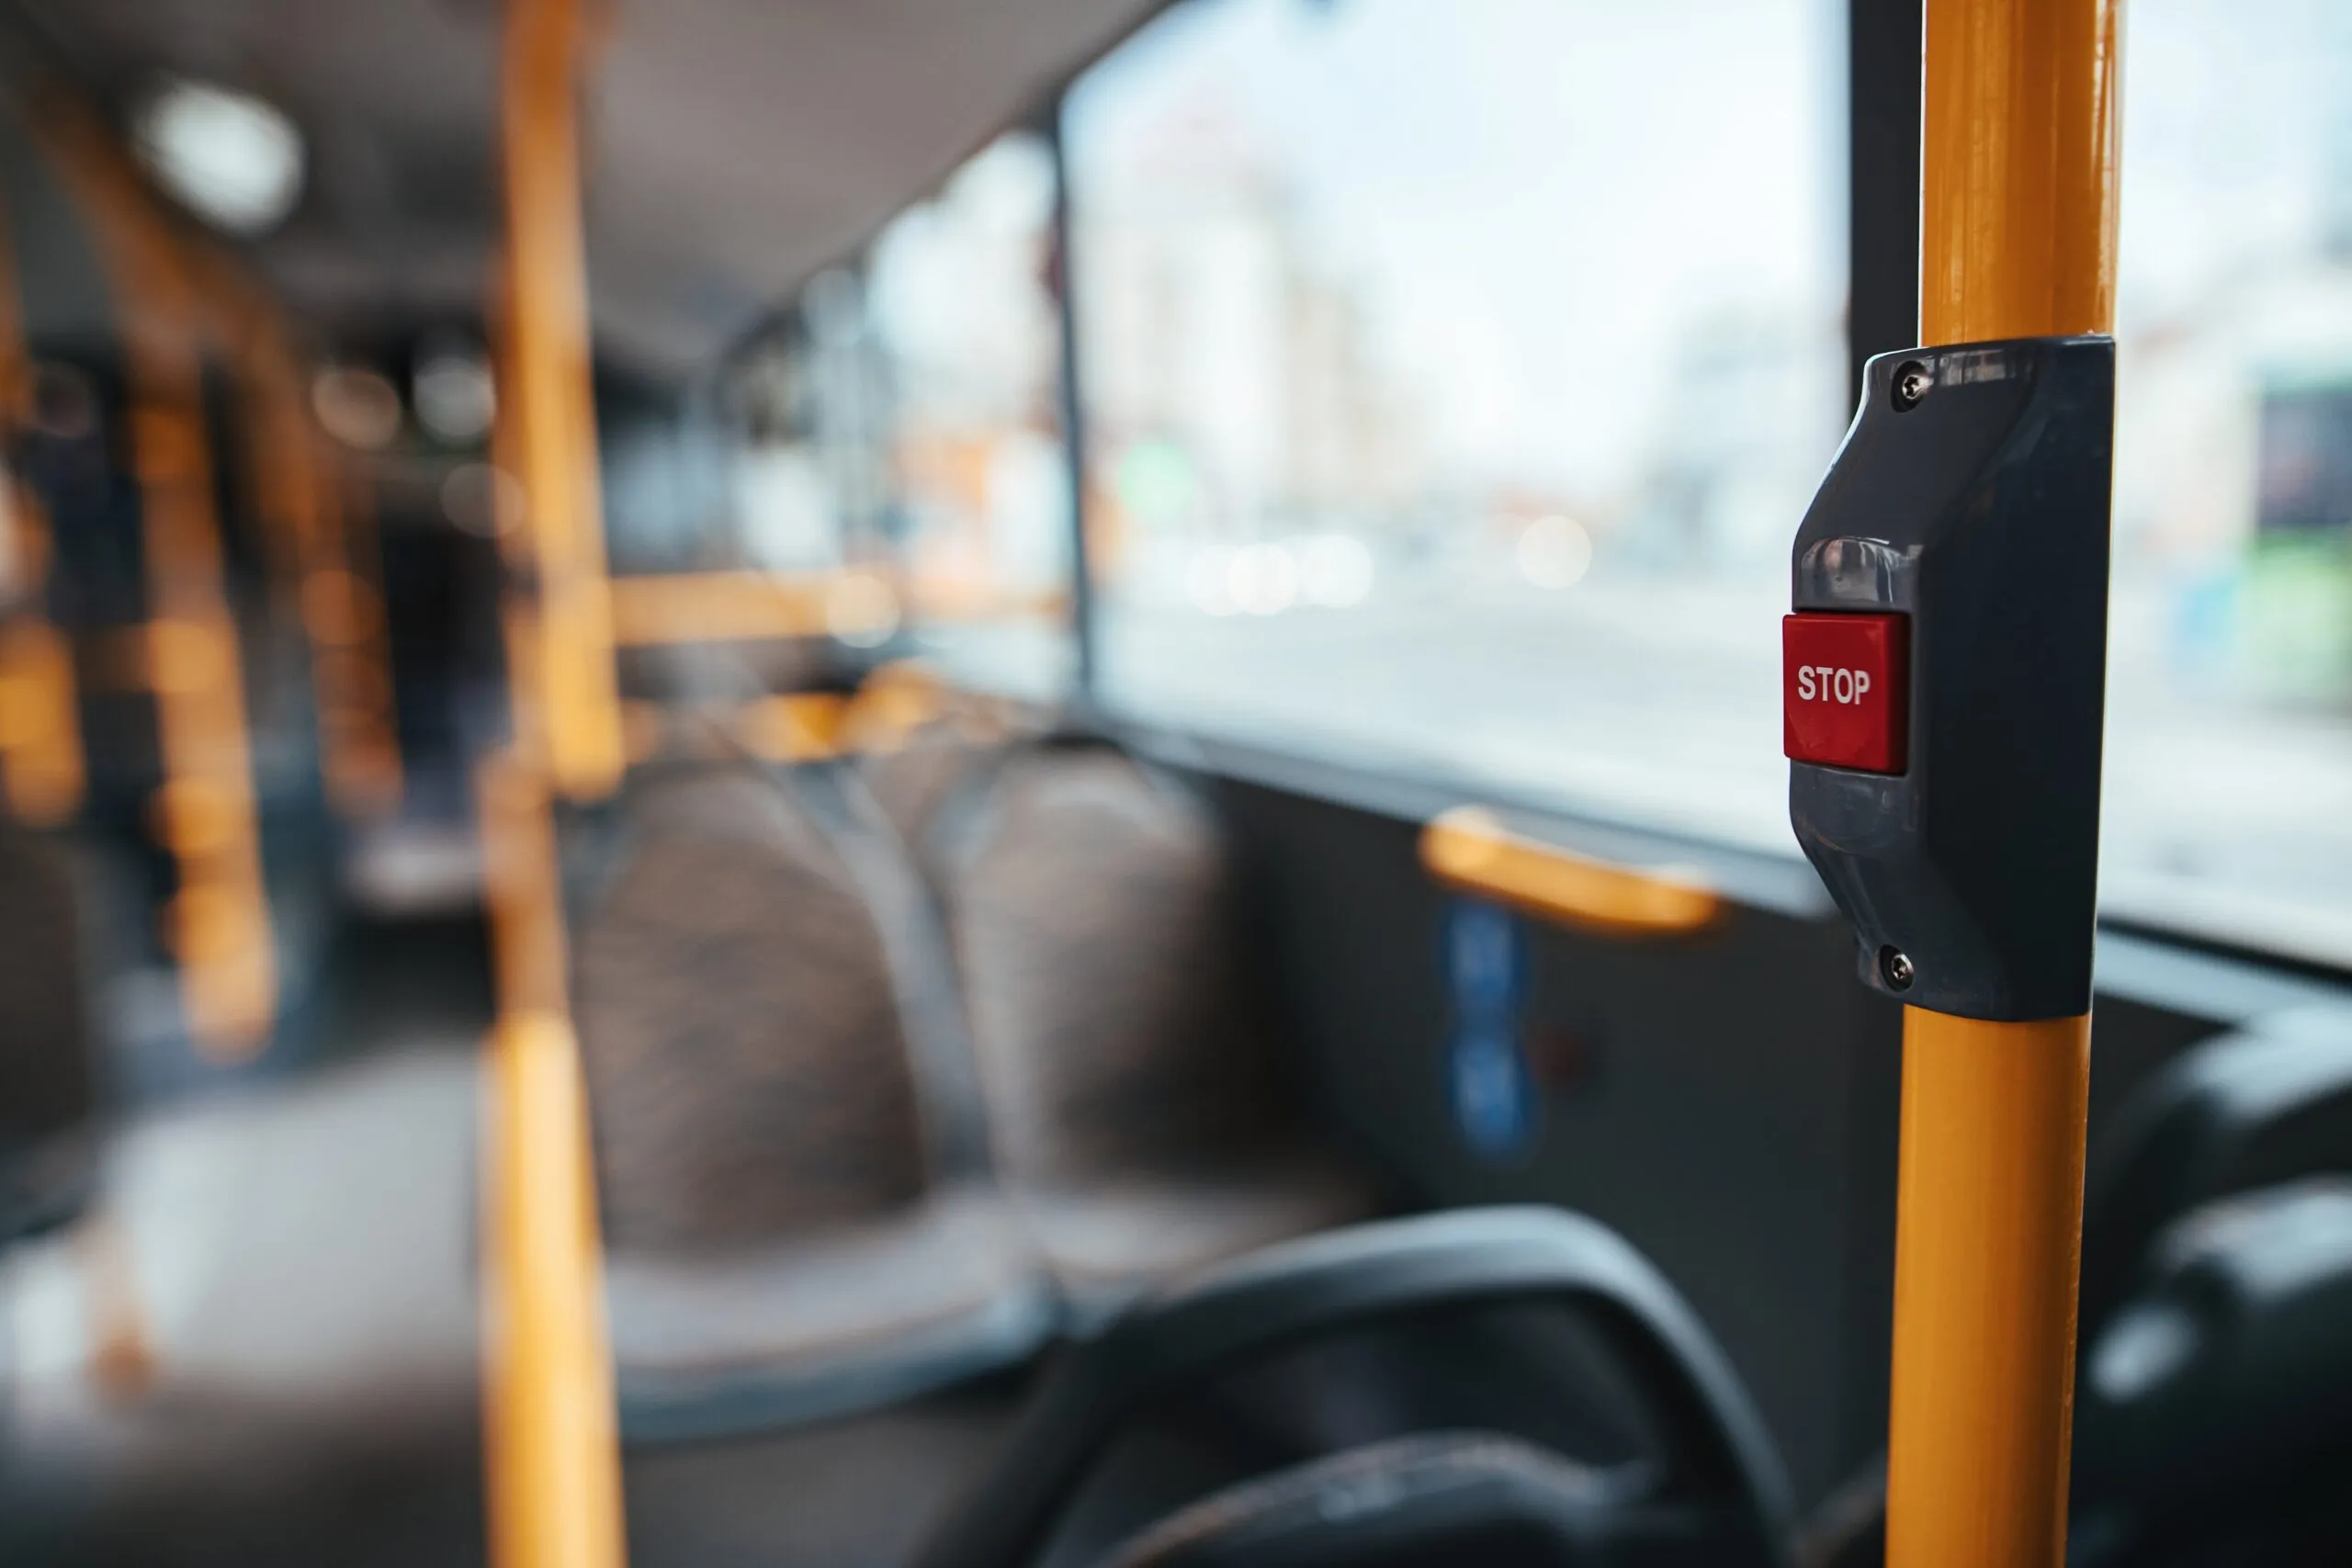 Picture of empty bus interior focuses on stop button. Get compensation for injuries incurred from a bus accident and call our Wyoming bus accident attorney today.